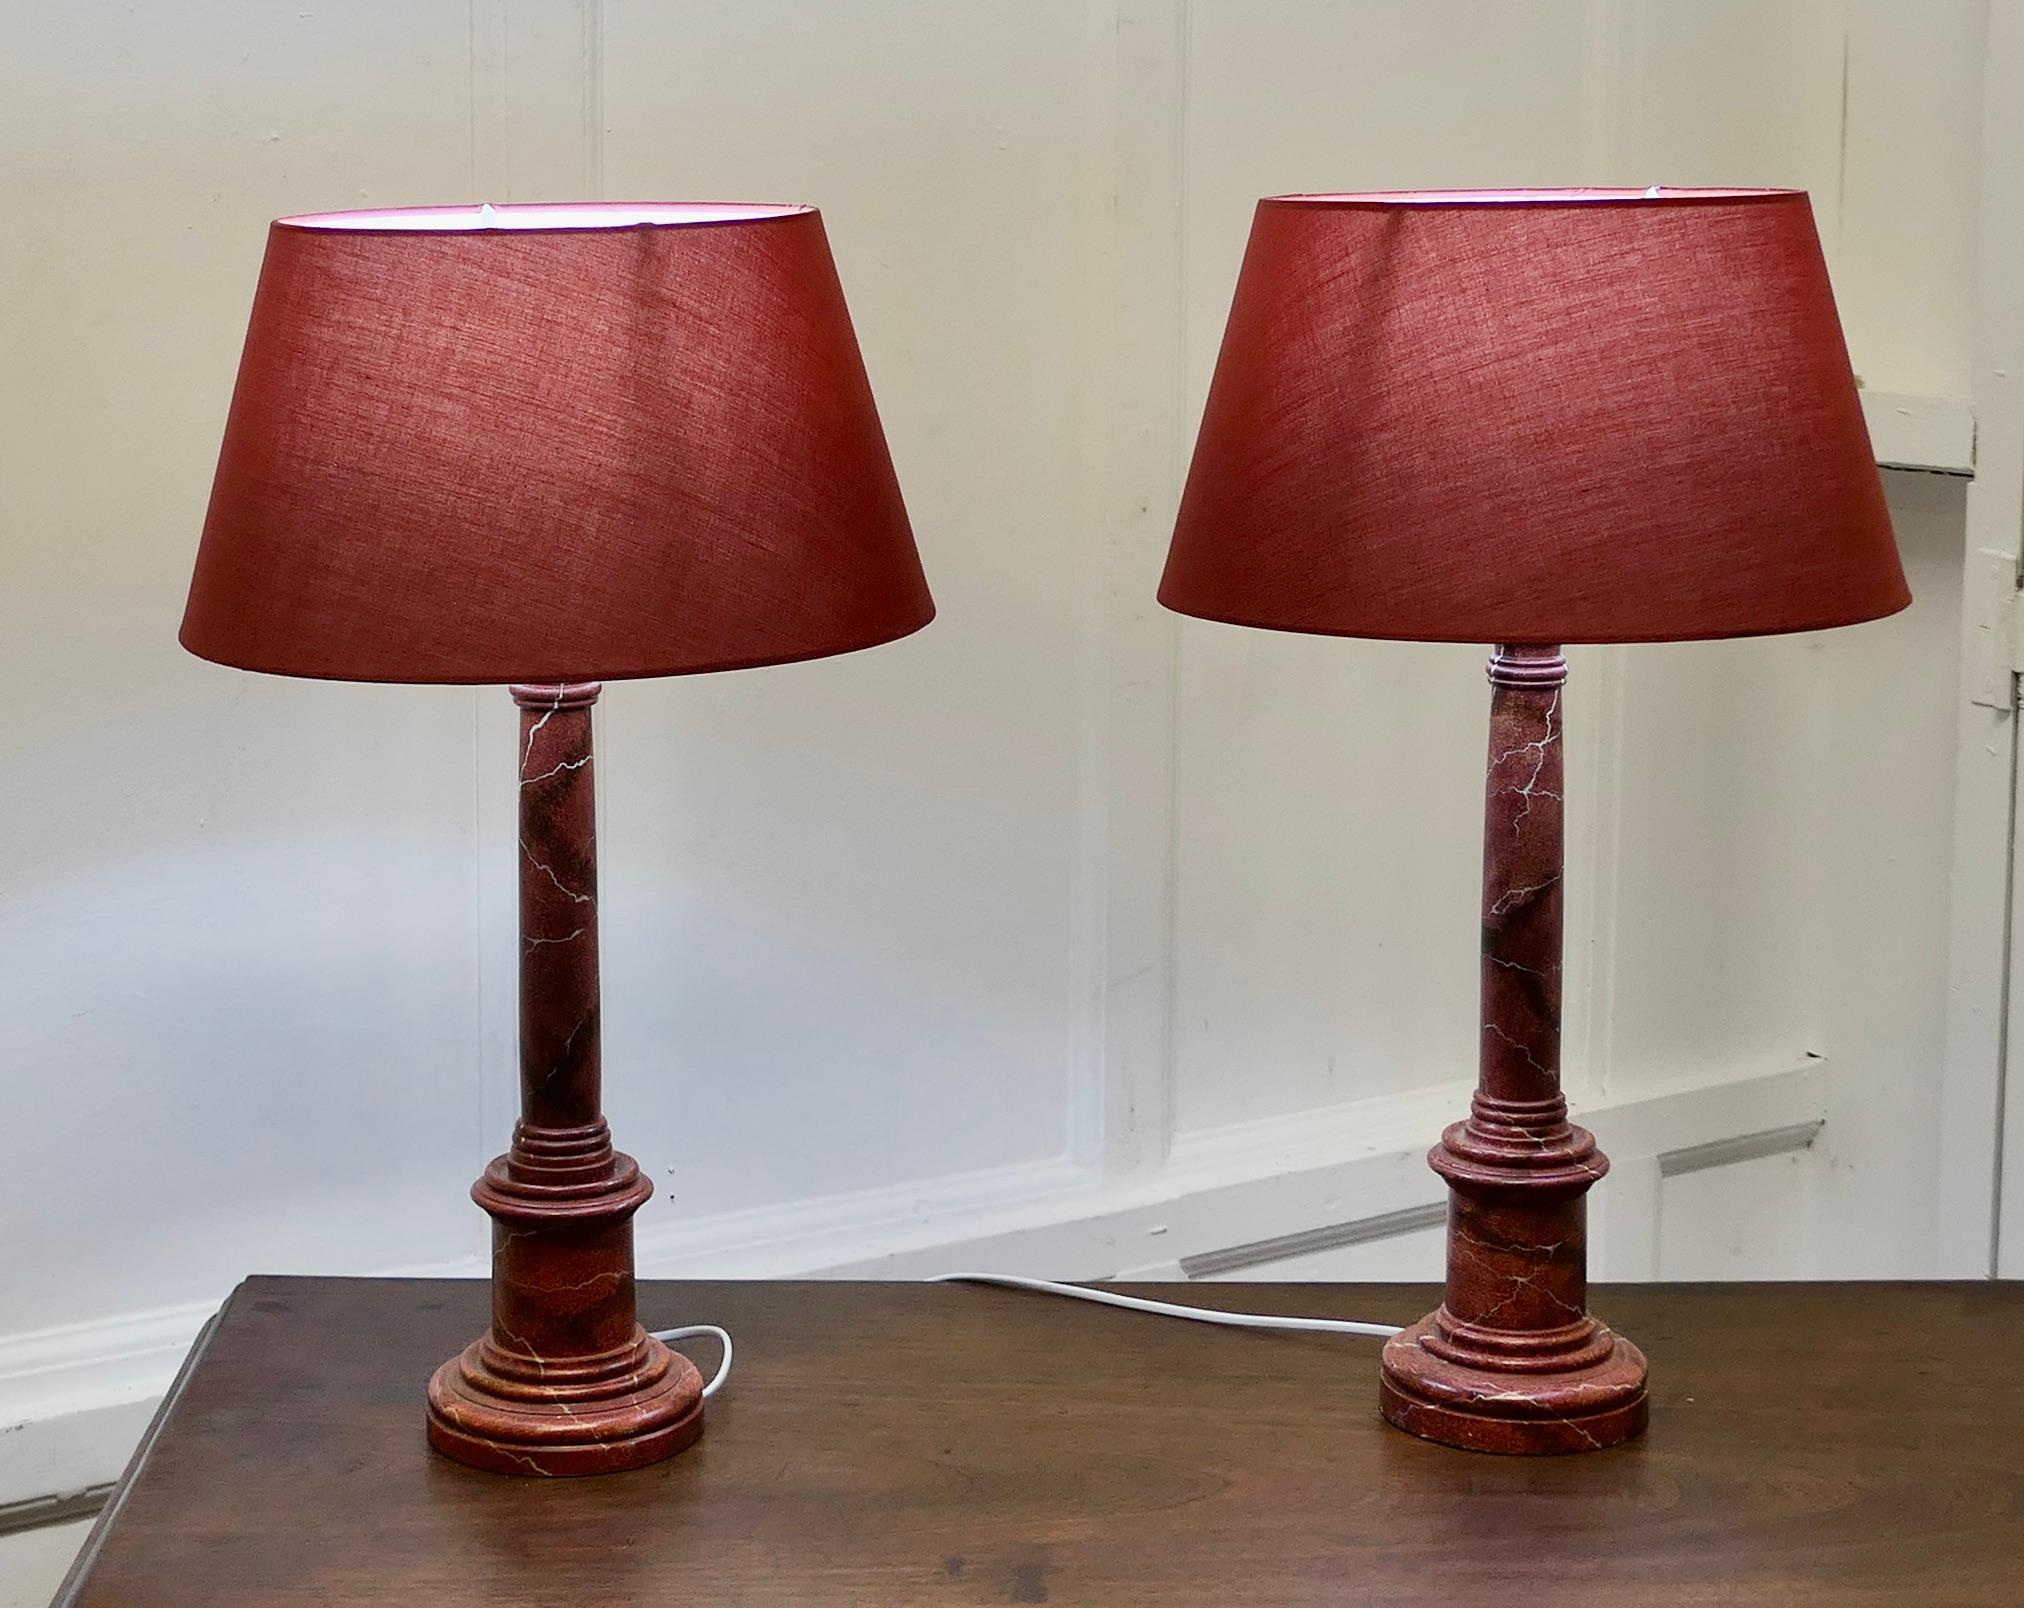 A Pair of Tall Simulated Marble Bedside Lamps with Shades    In Good Condition For Sale In Chillerton, Isle of Wight